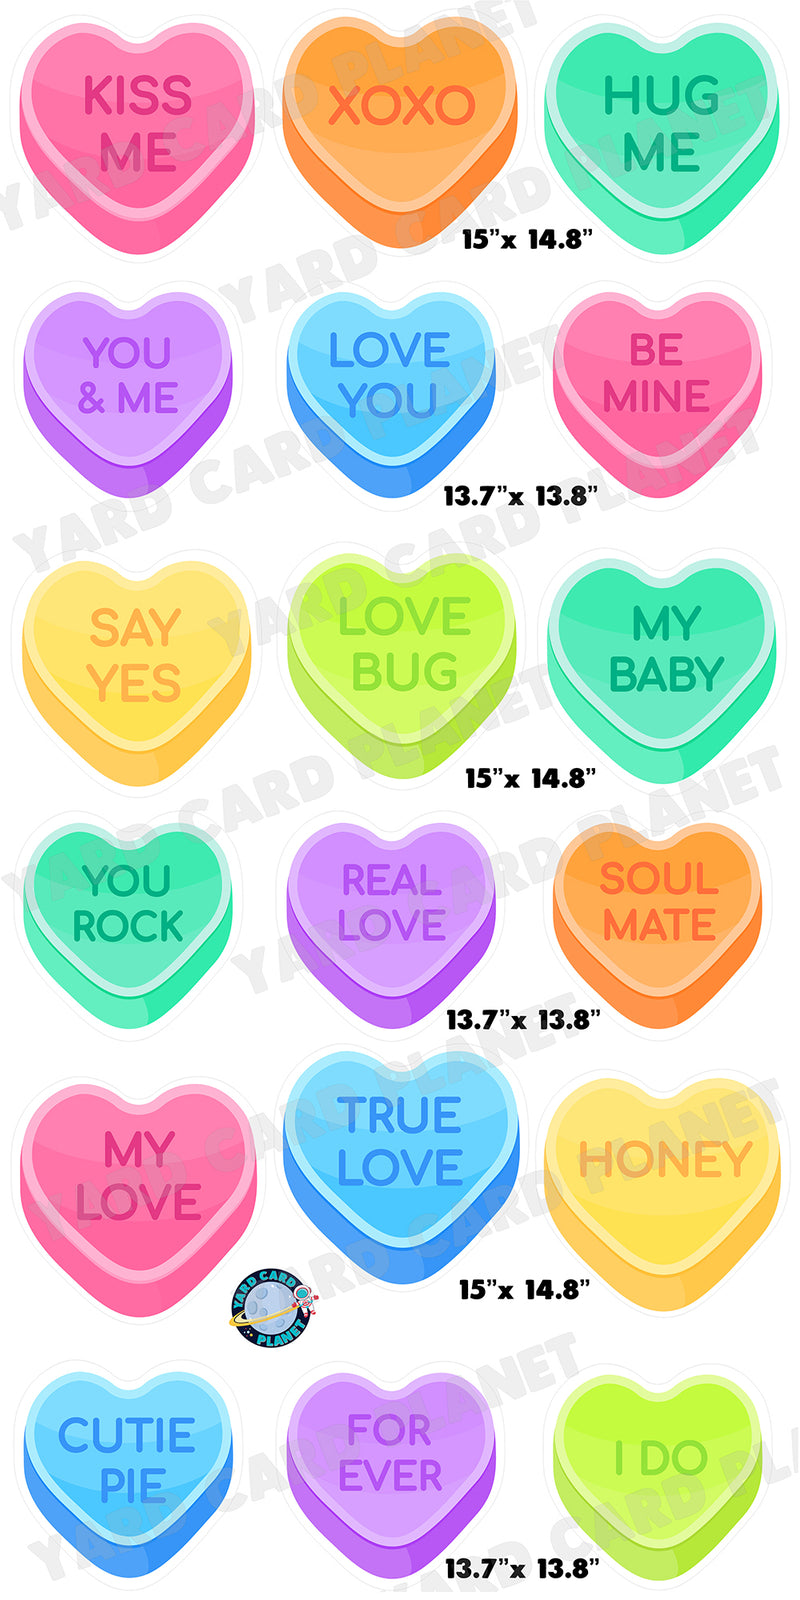 Sweetheart Heart Candies with Message Yard Card Flair Set